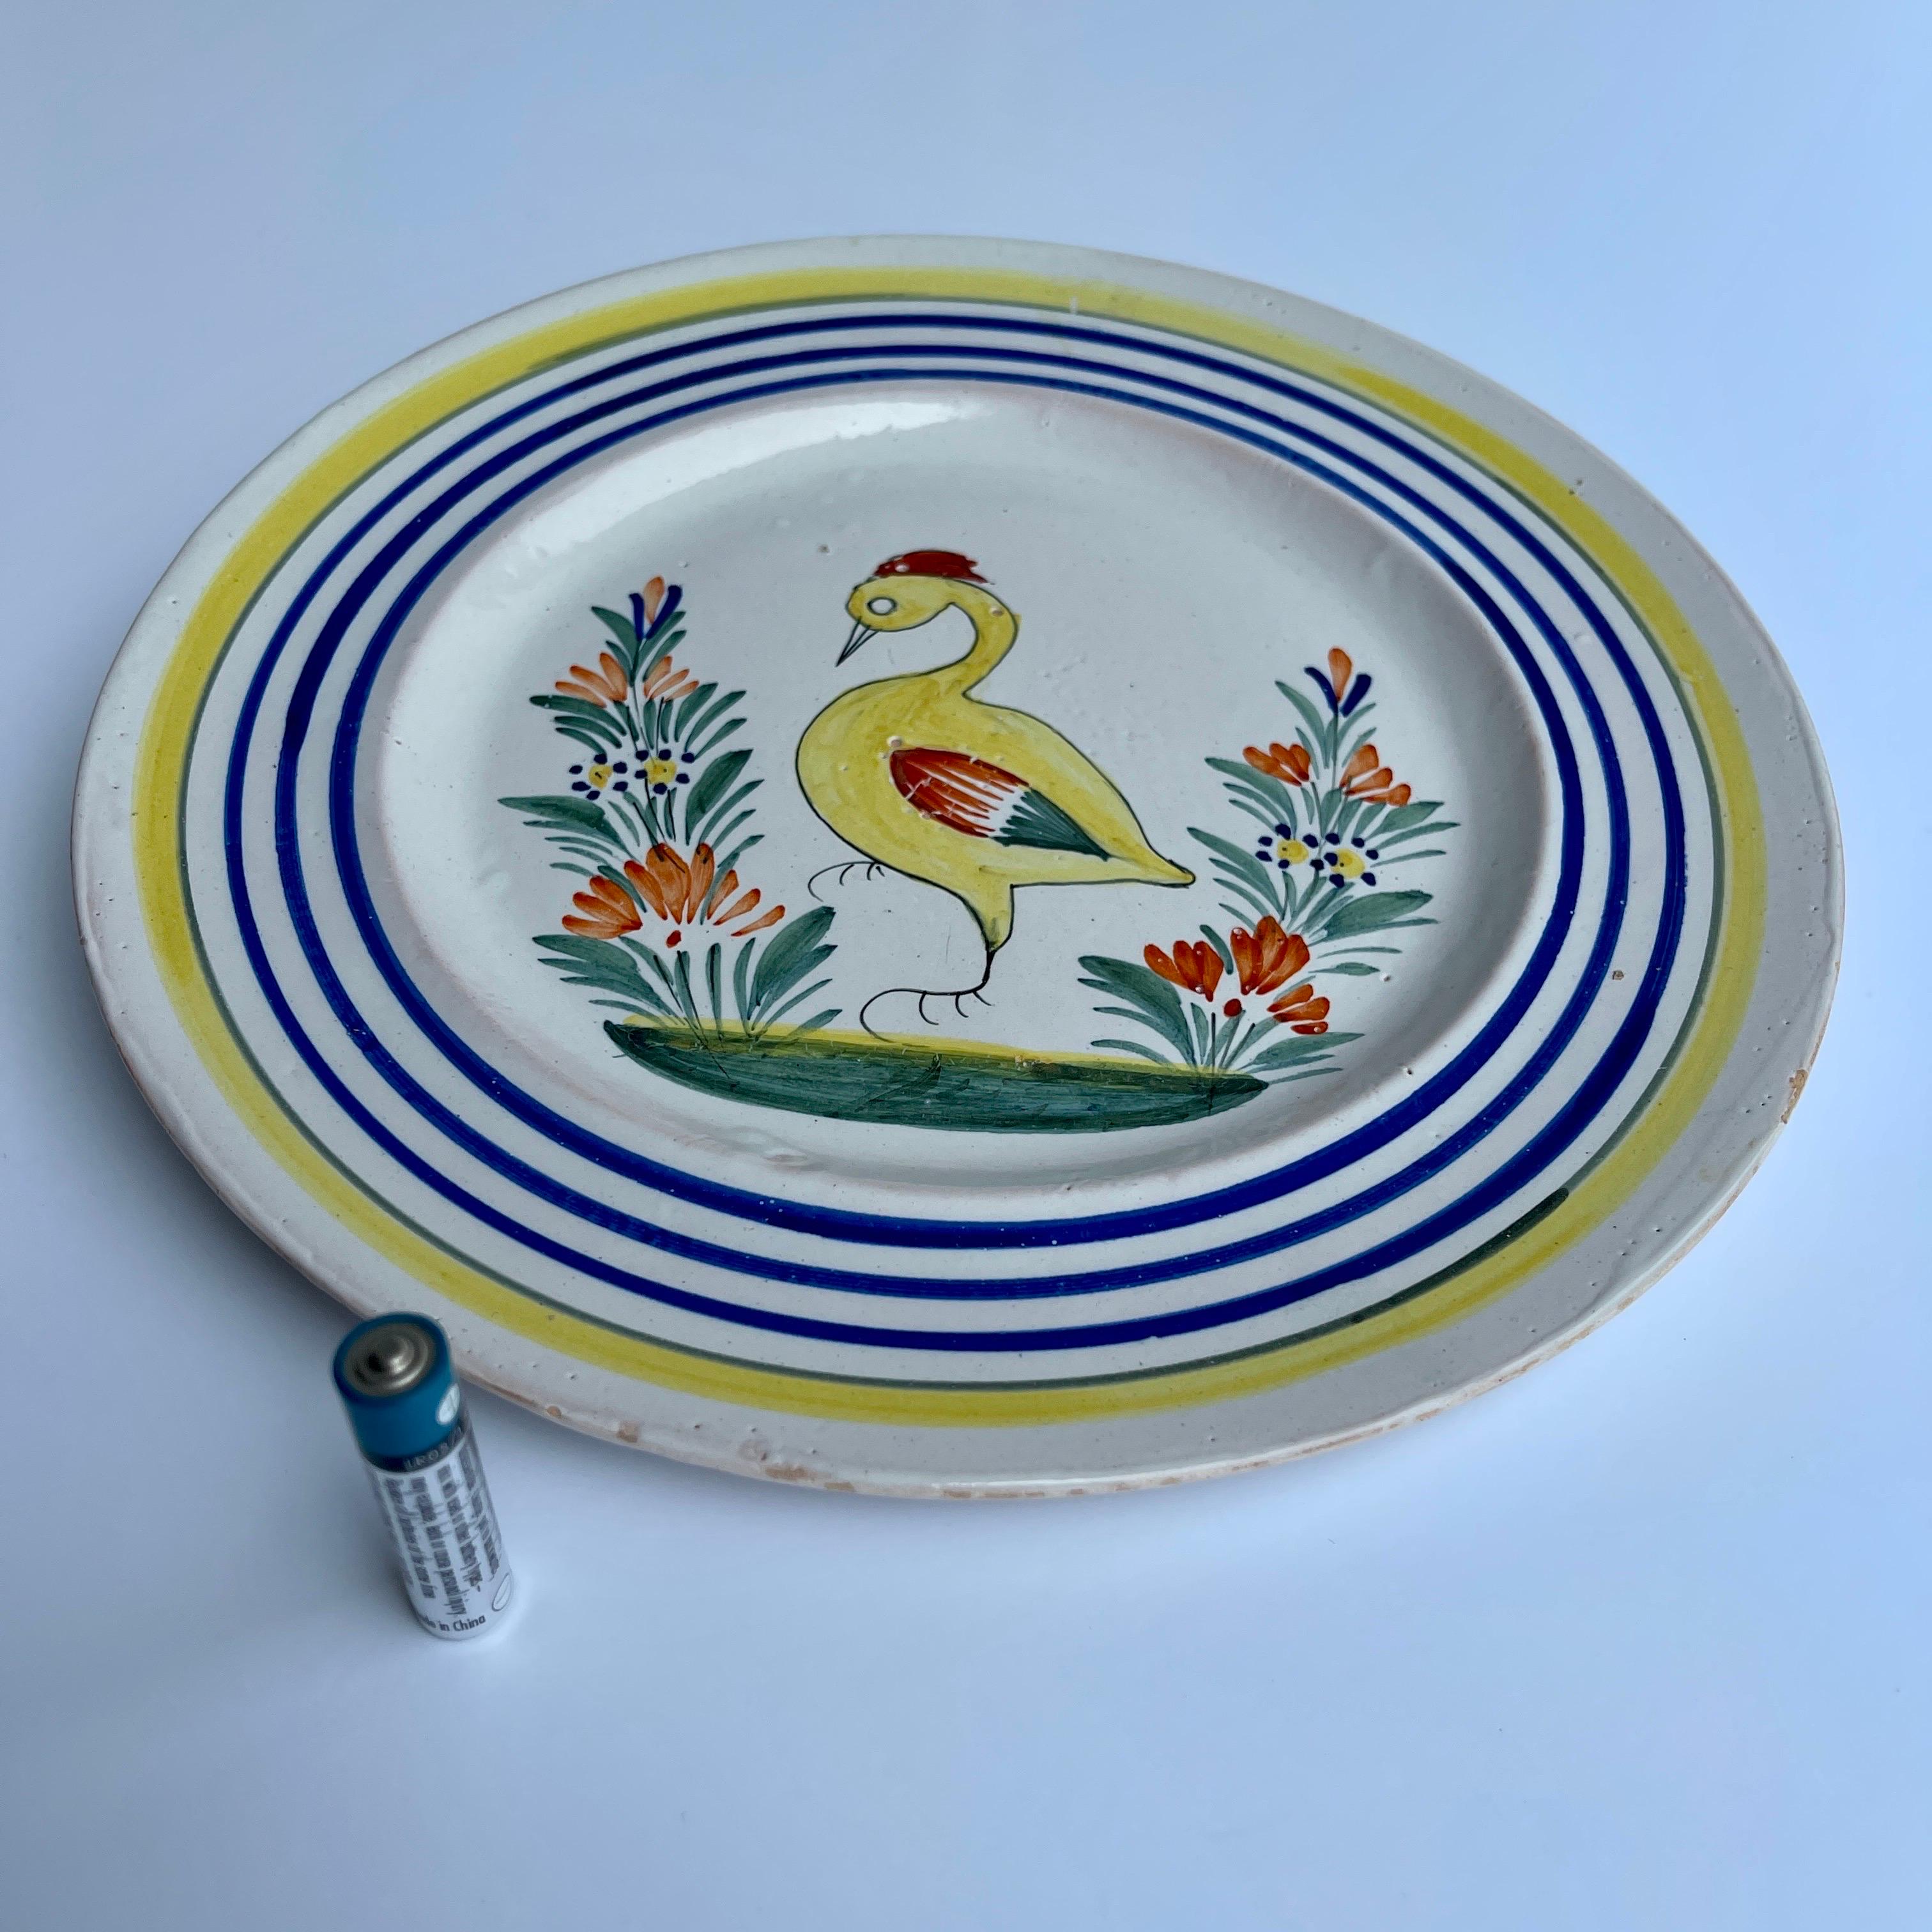 Henroit Quimper Faience Duck Plate, France, circa 1930s For Sale 1